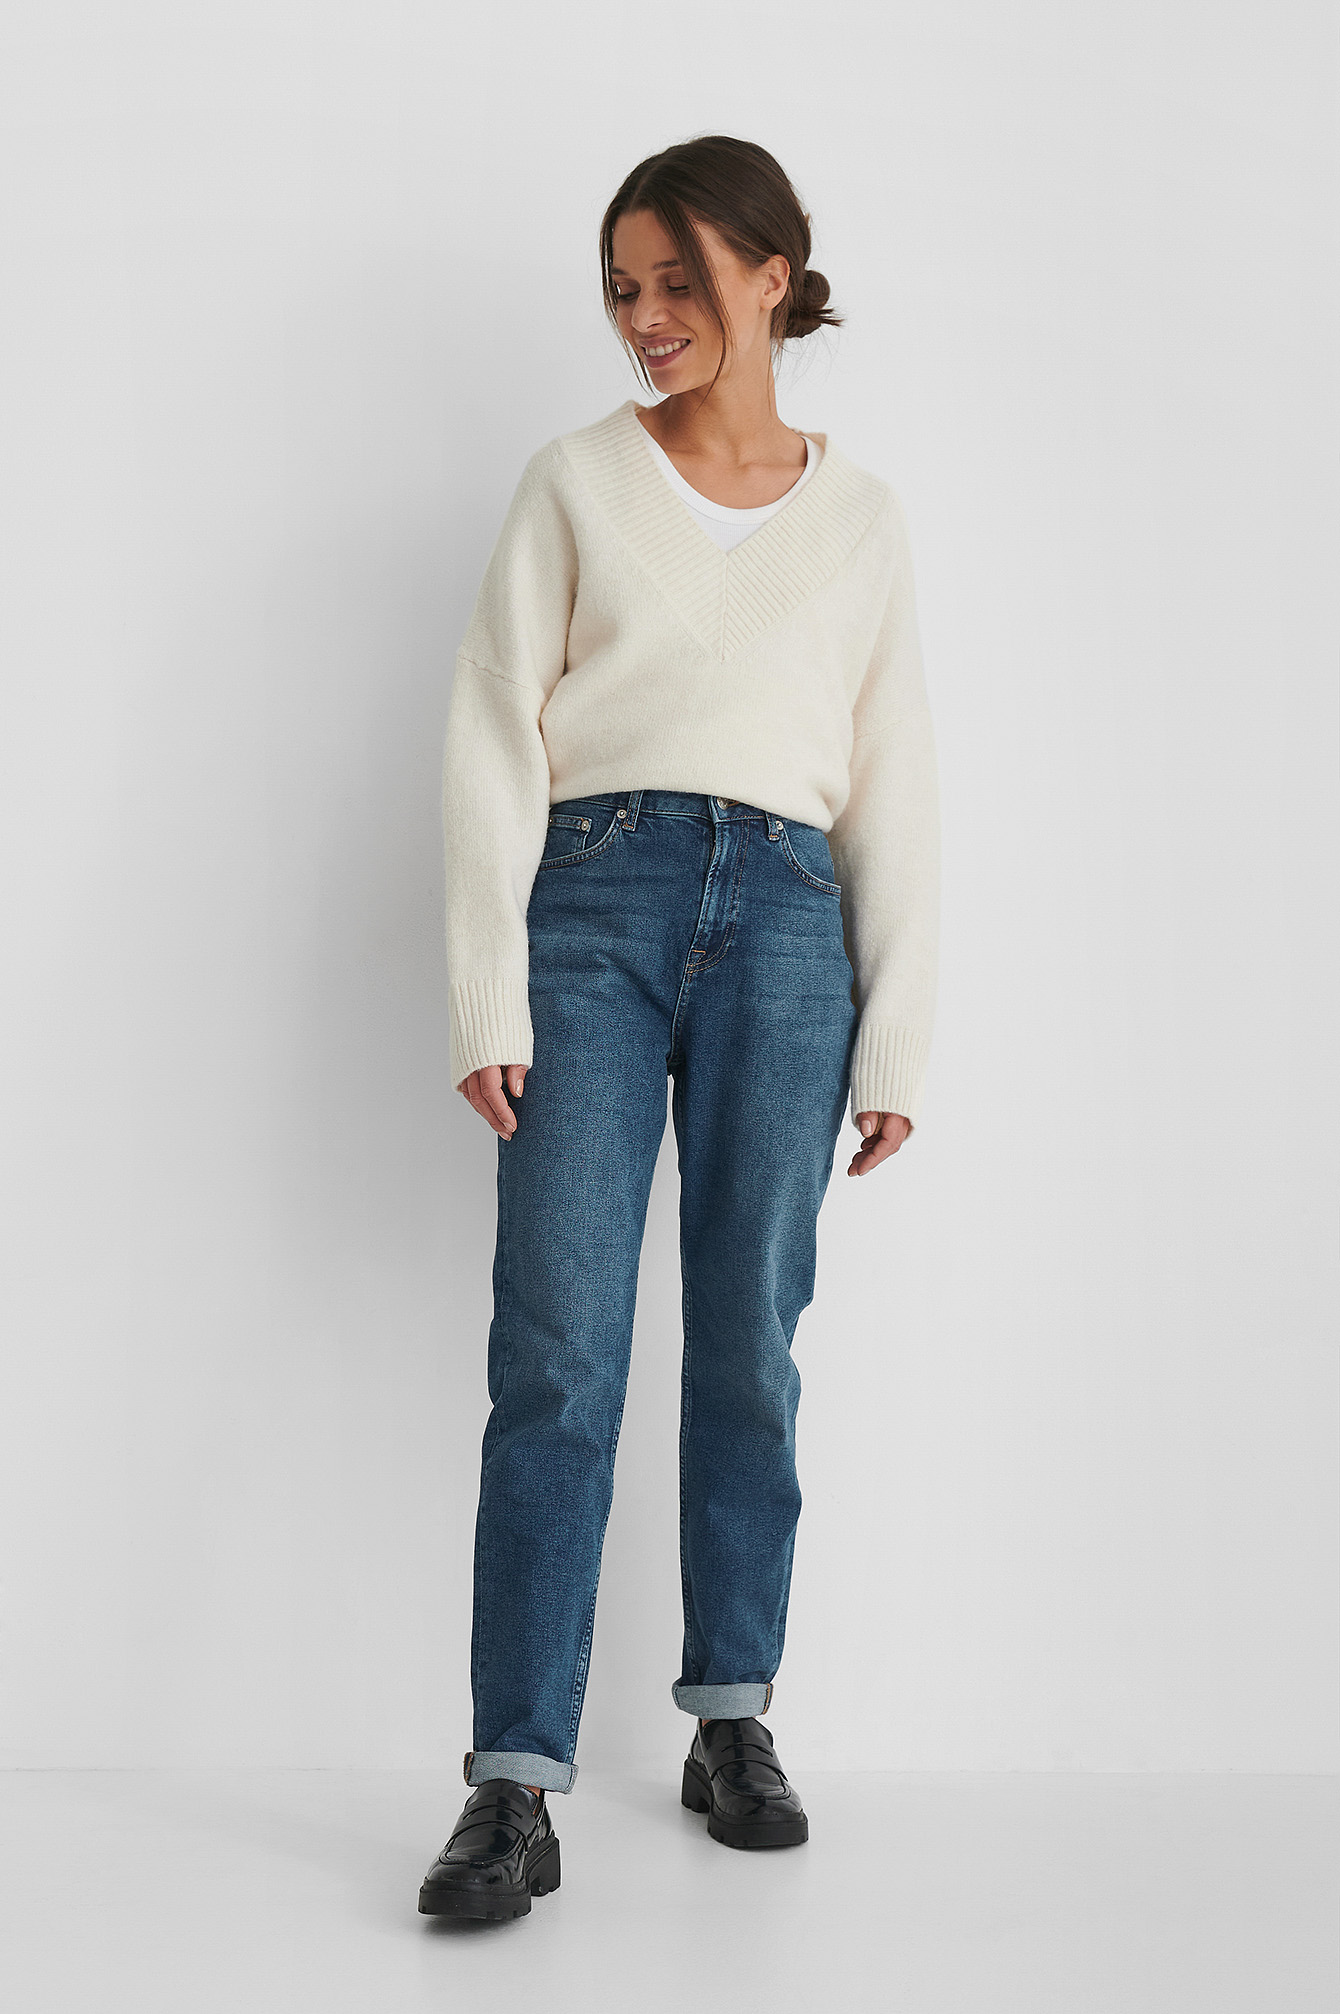 Organic Turn Up Mom Jeans with a White Knitted Sweater.